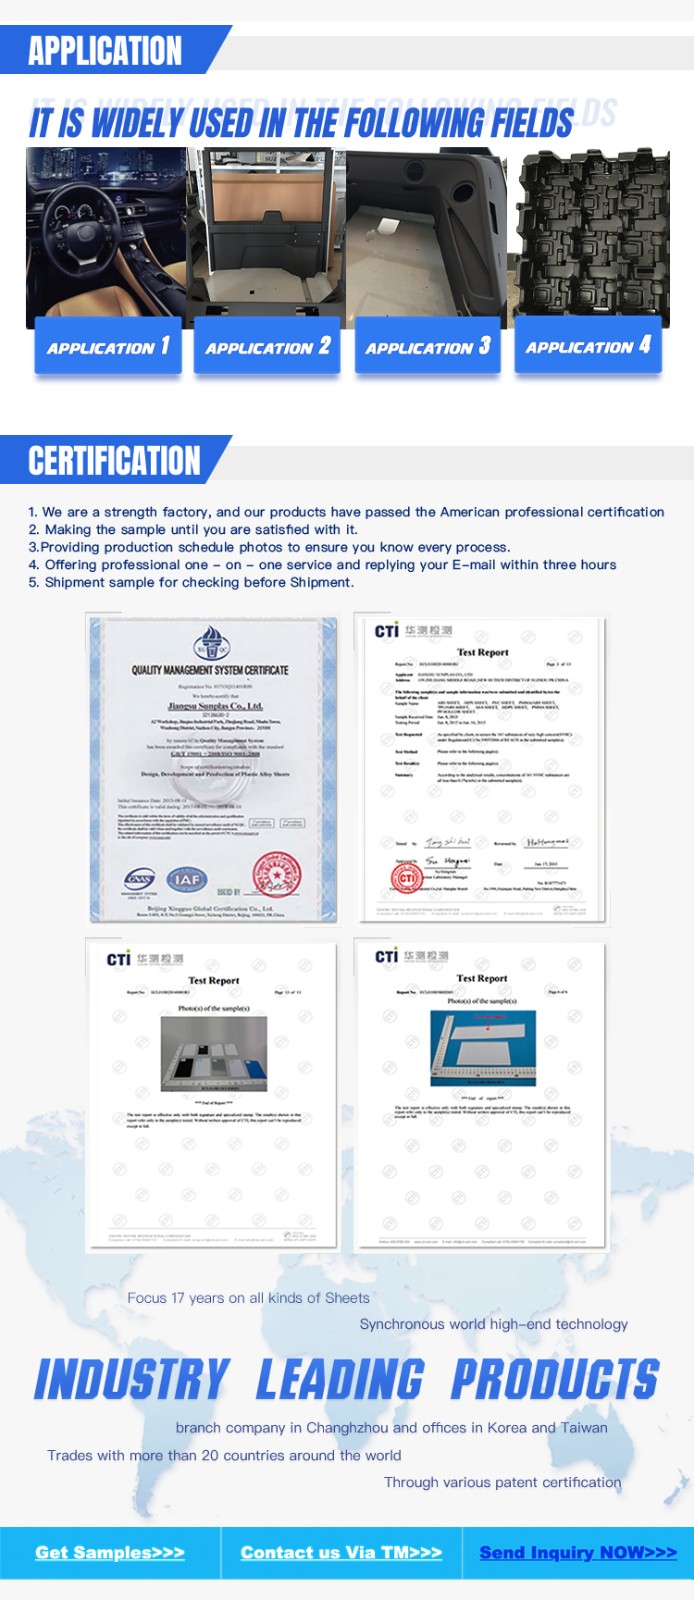 Applications and certifications for MS diffuser sheet 